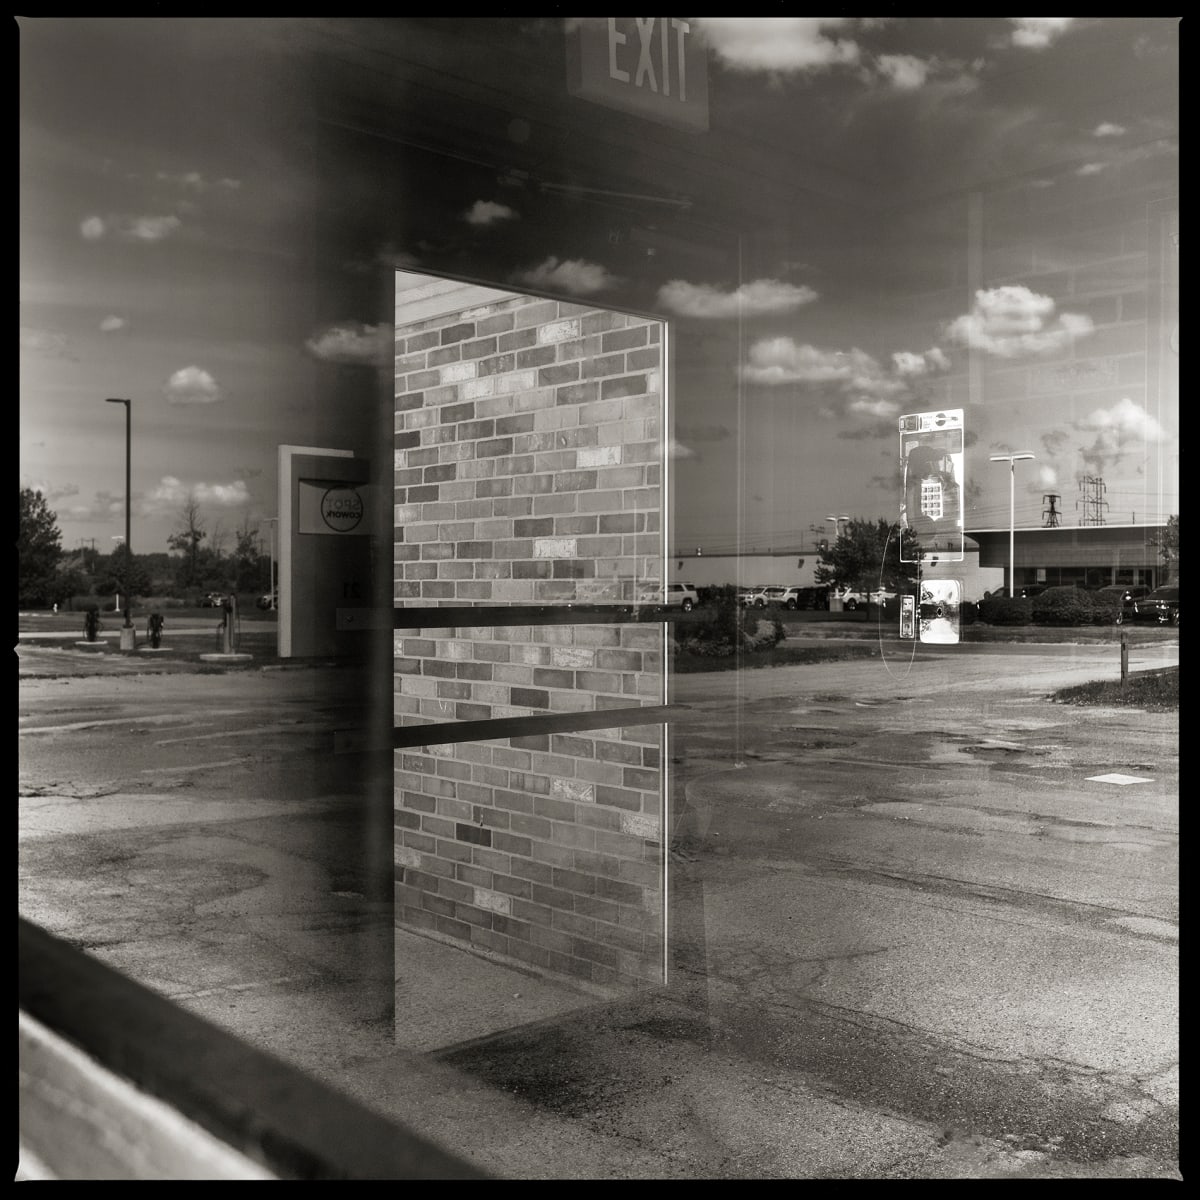 585.427.9821 – Pizza Hut #606105, 3120 Winton Road South, Rochester, NY 14623 by Eric T. Kunsman  Image: ID: A black and white image shows a semi-reflective window.  Though the reflection of the sky and the outside, there is a payphone in the building.  There is also a glass door that can be seen through the window in which there are bricks visible.